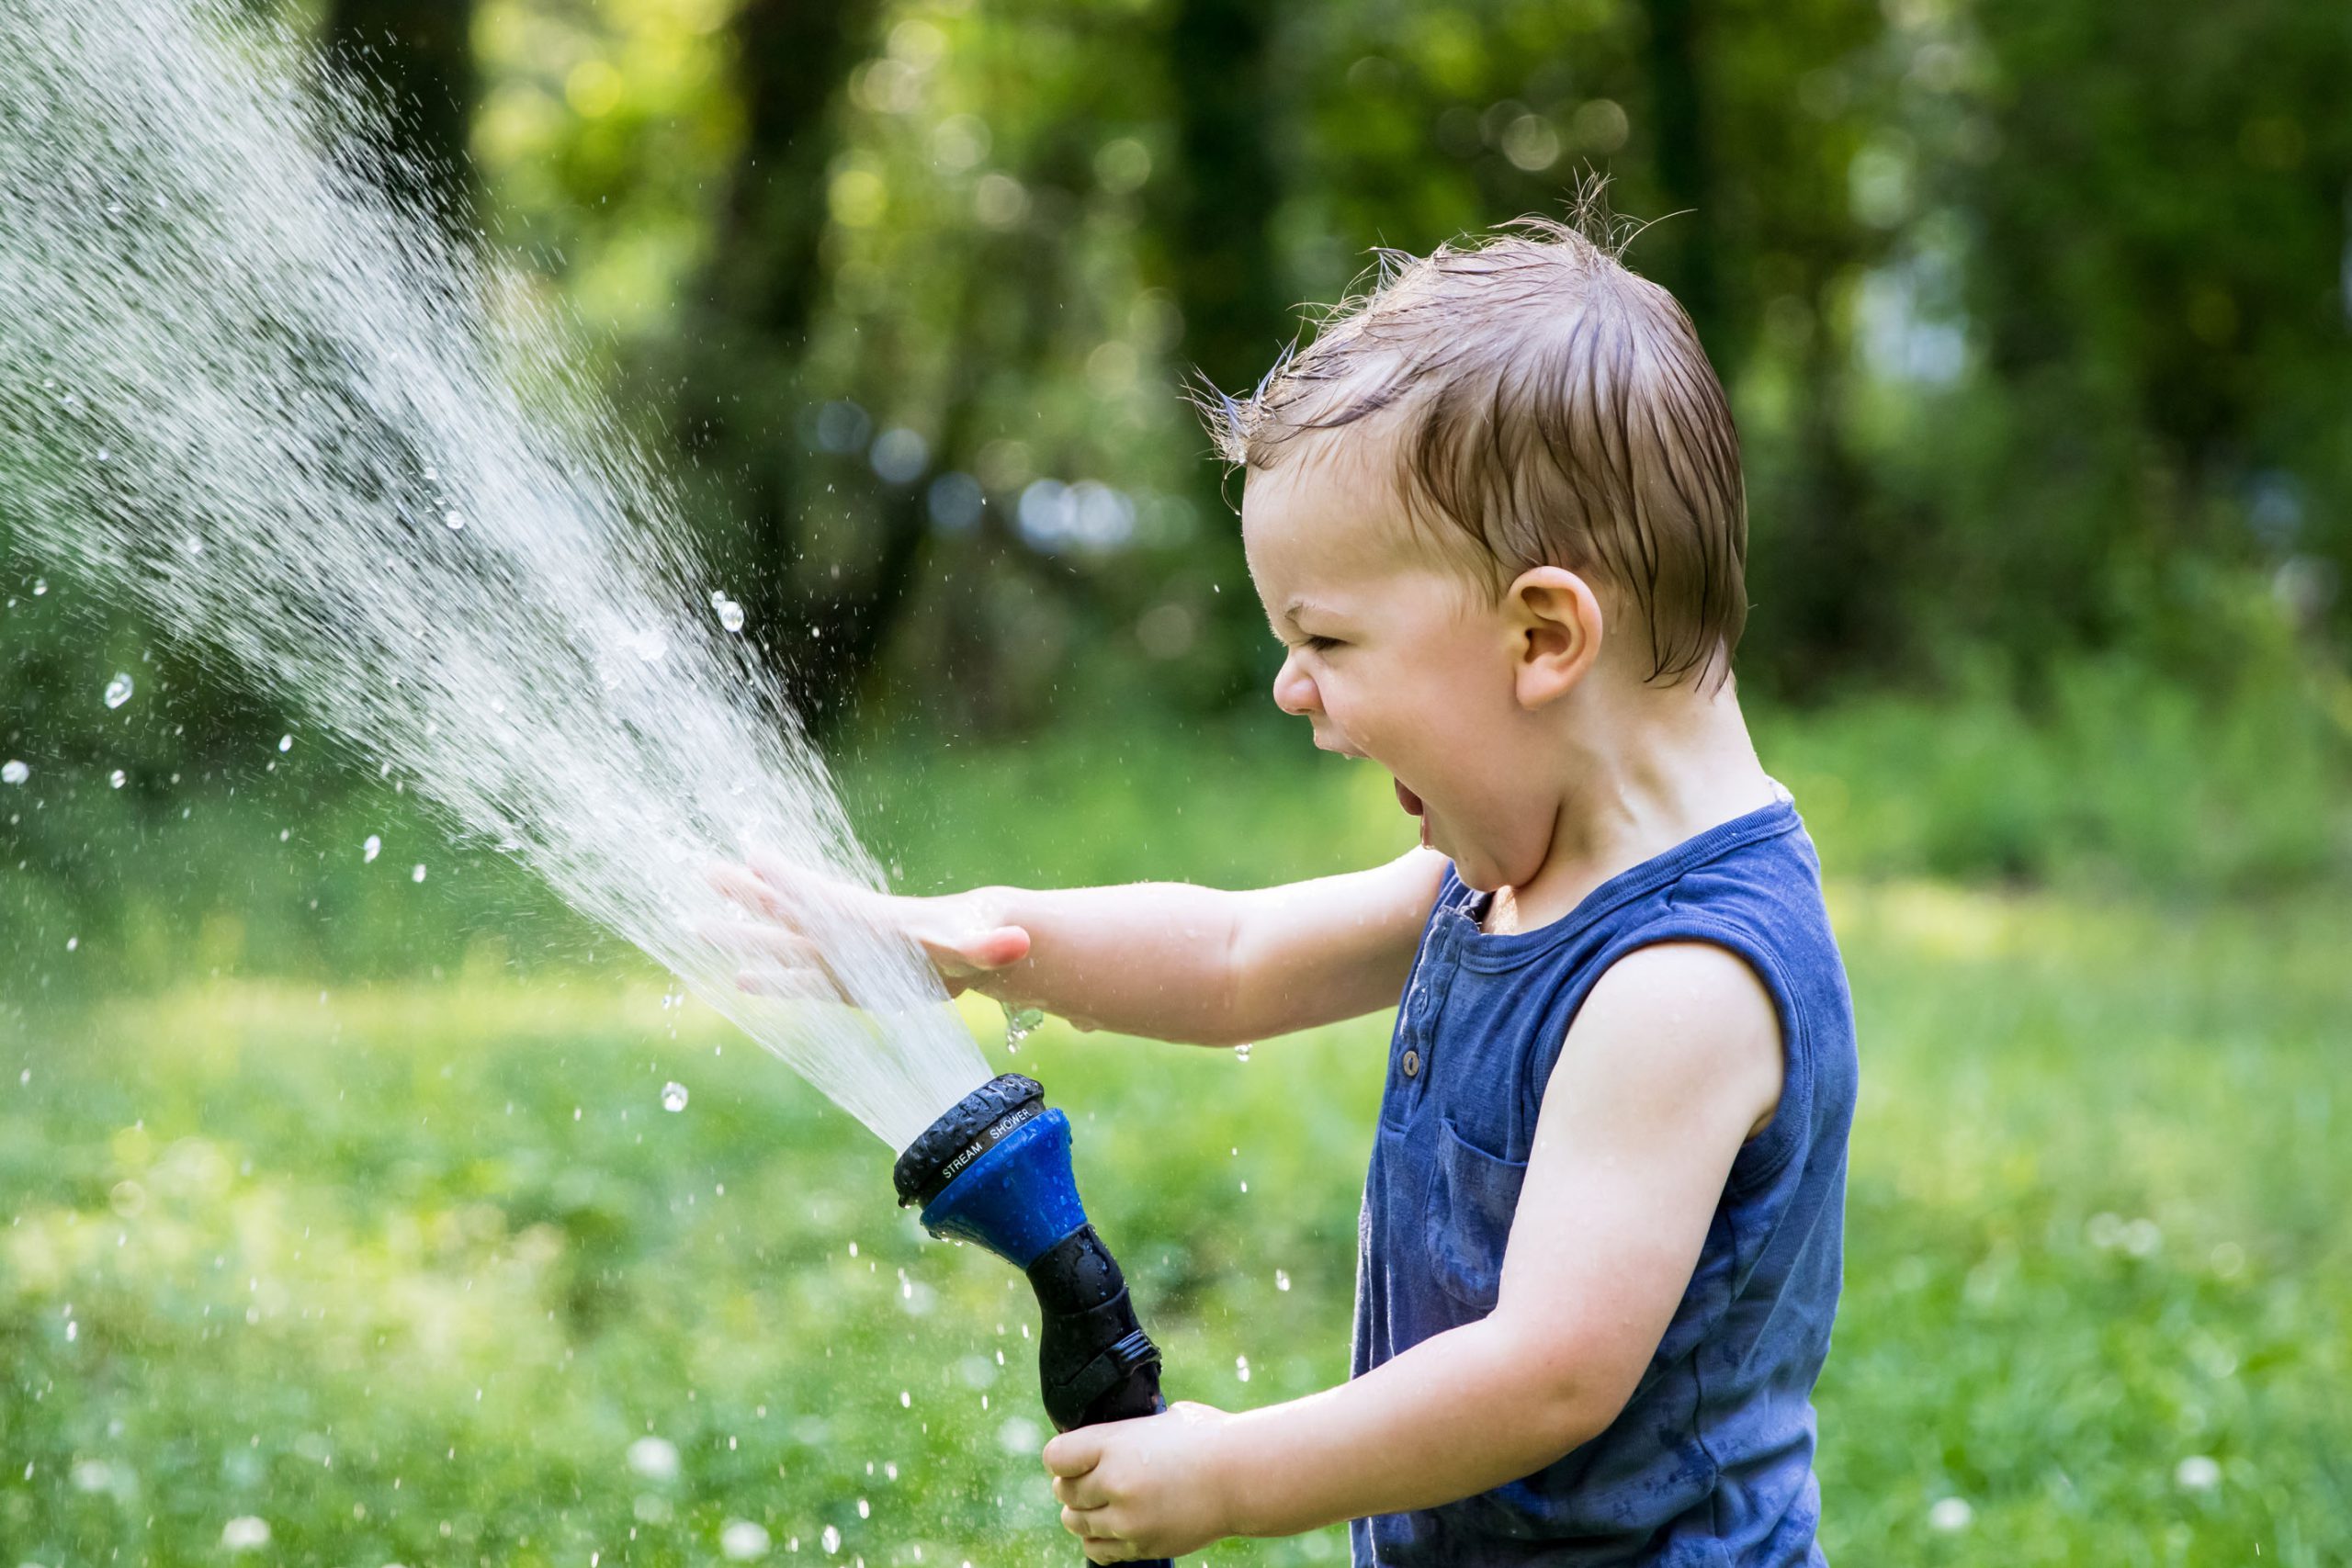 Young boy playing with hose outdoors